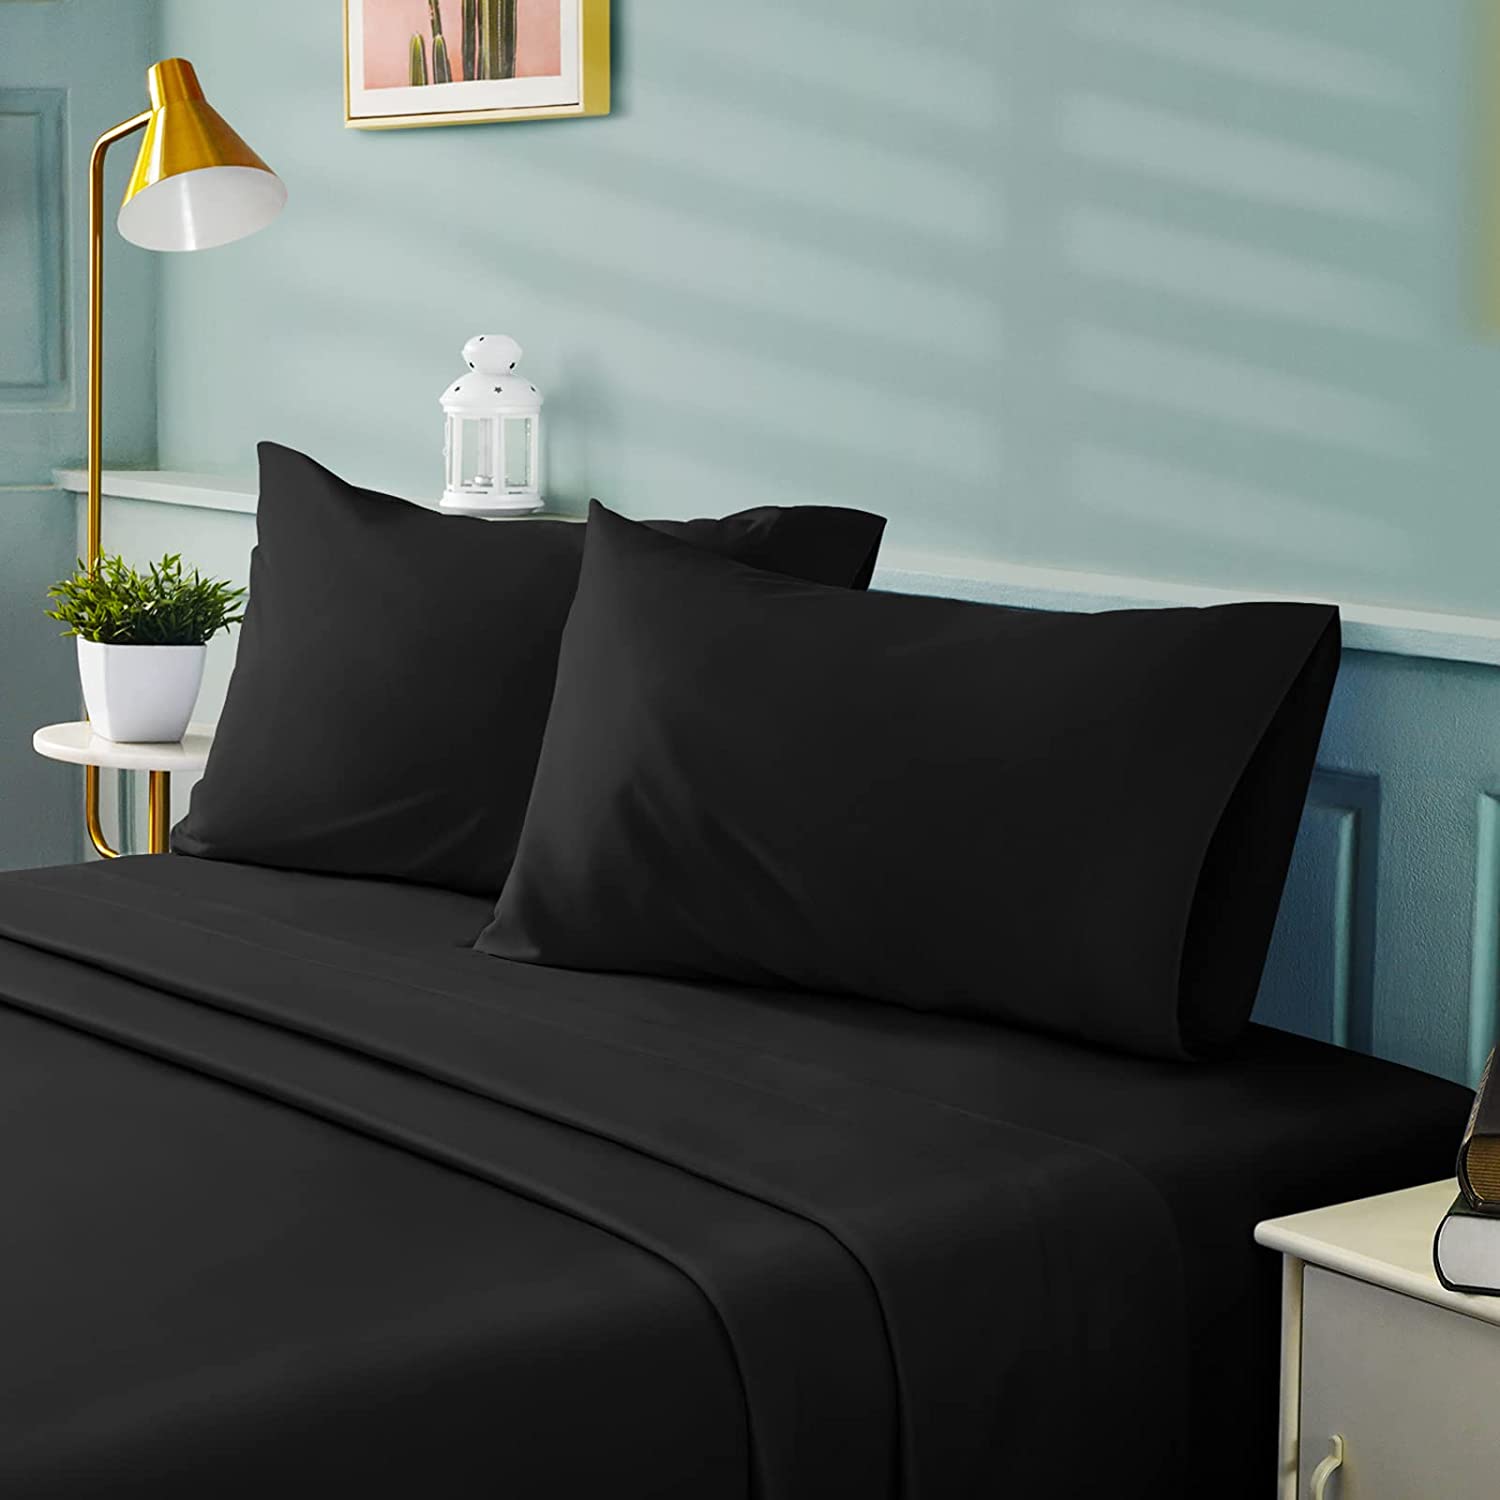 Buy King Size Flat Sheet Black Egyptian Cotton 1000 Thread Count at- Egyptianhomelinens.com